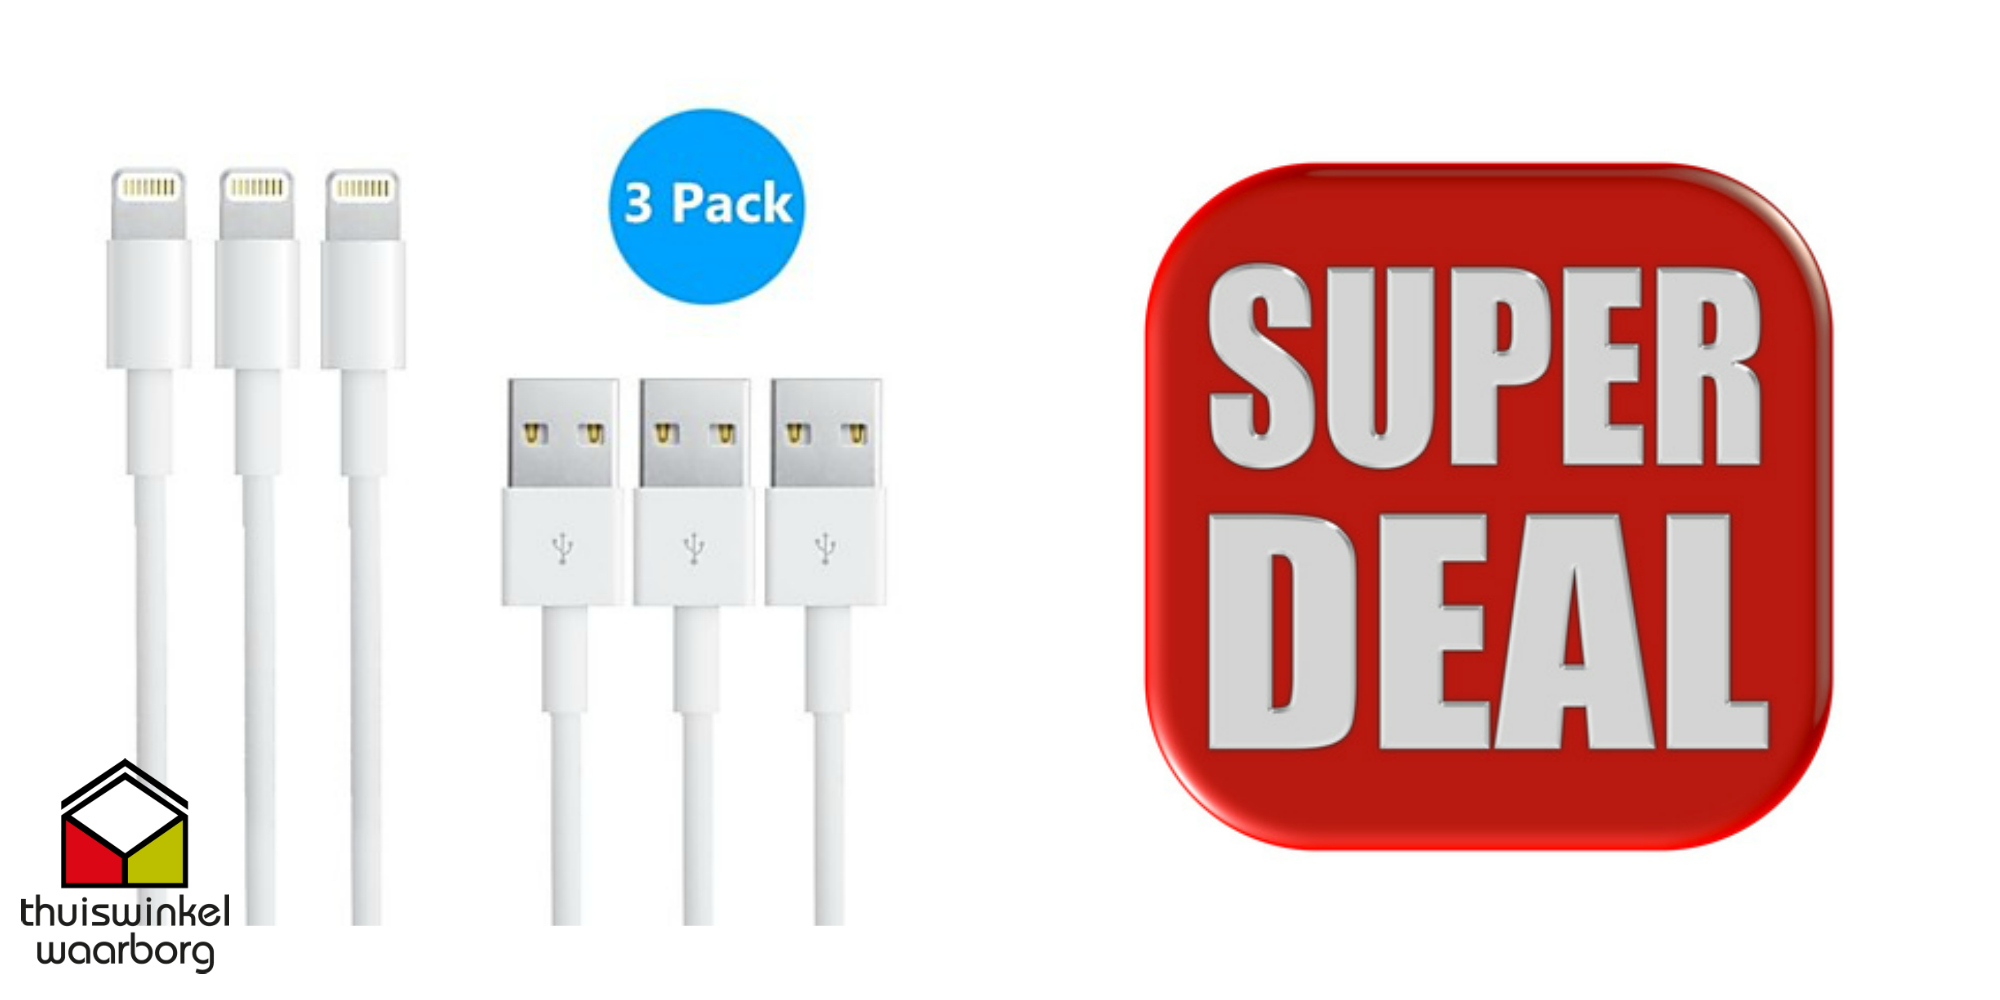 One Day Price - 3 Pack 8-Pin to USB kabel